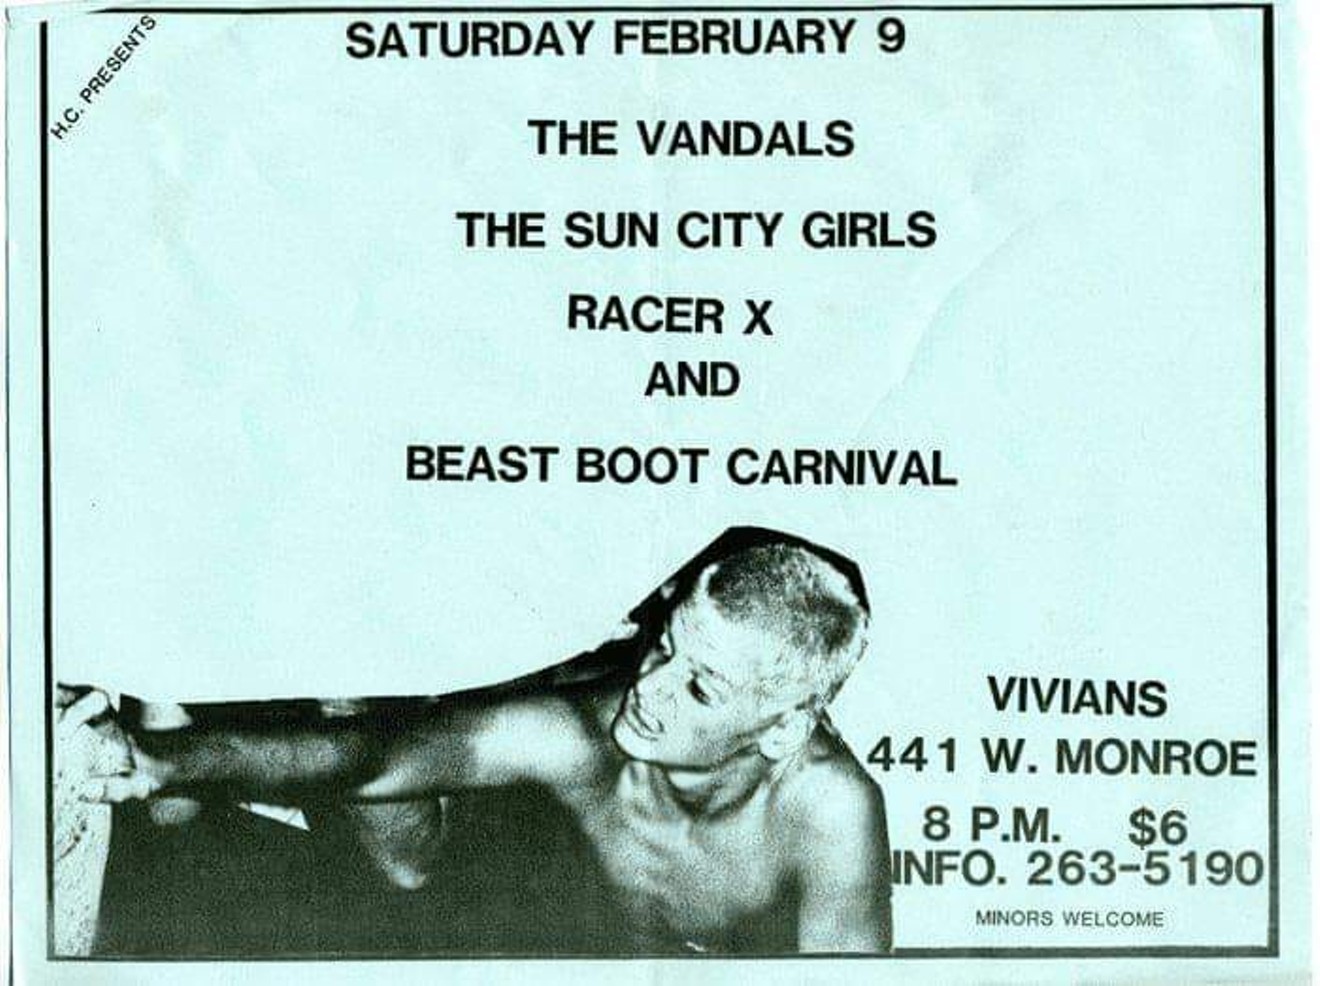 A flyer from the early '80s Phoenix punk scene.